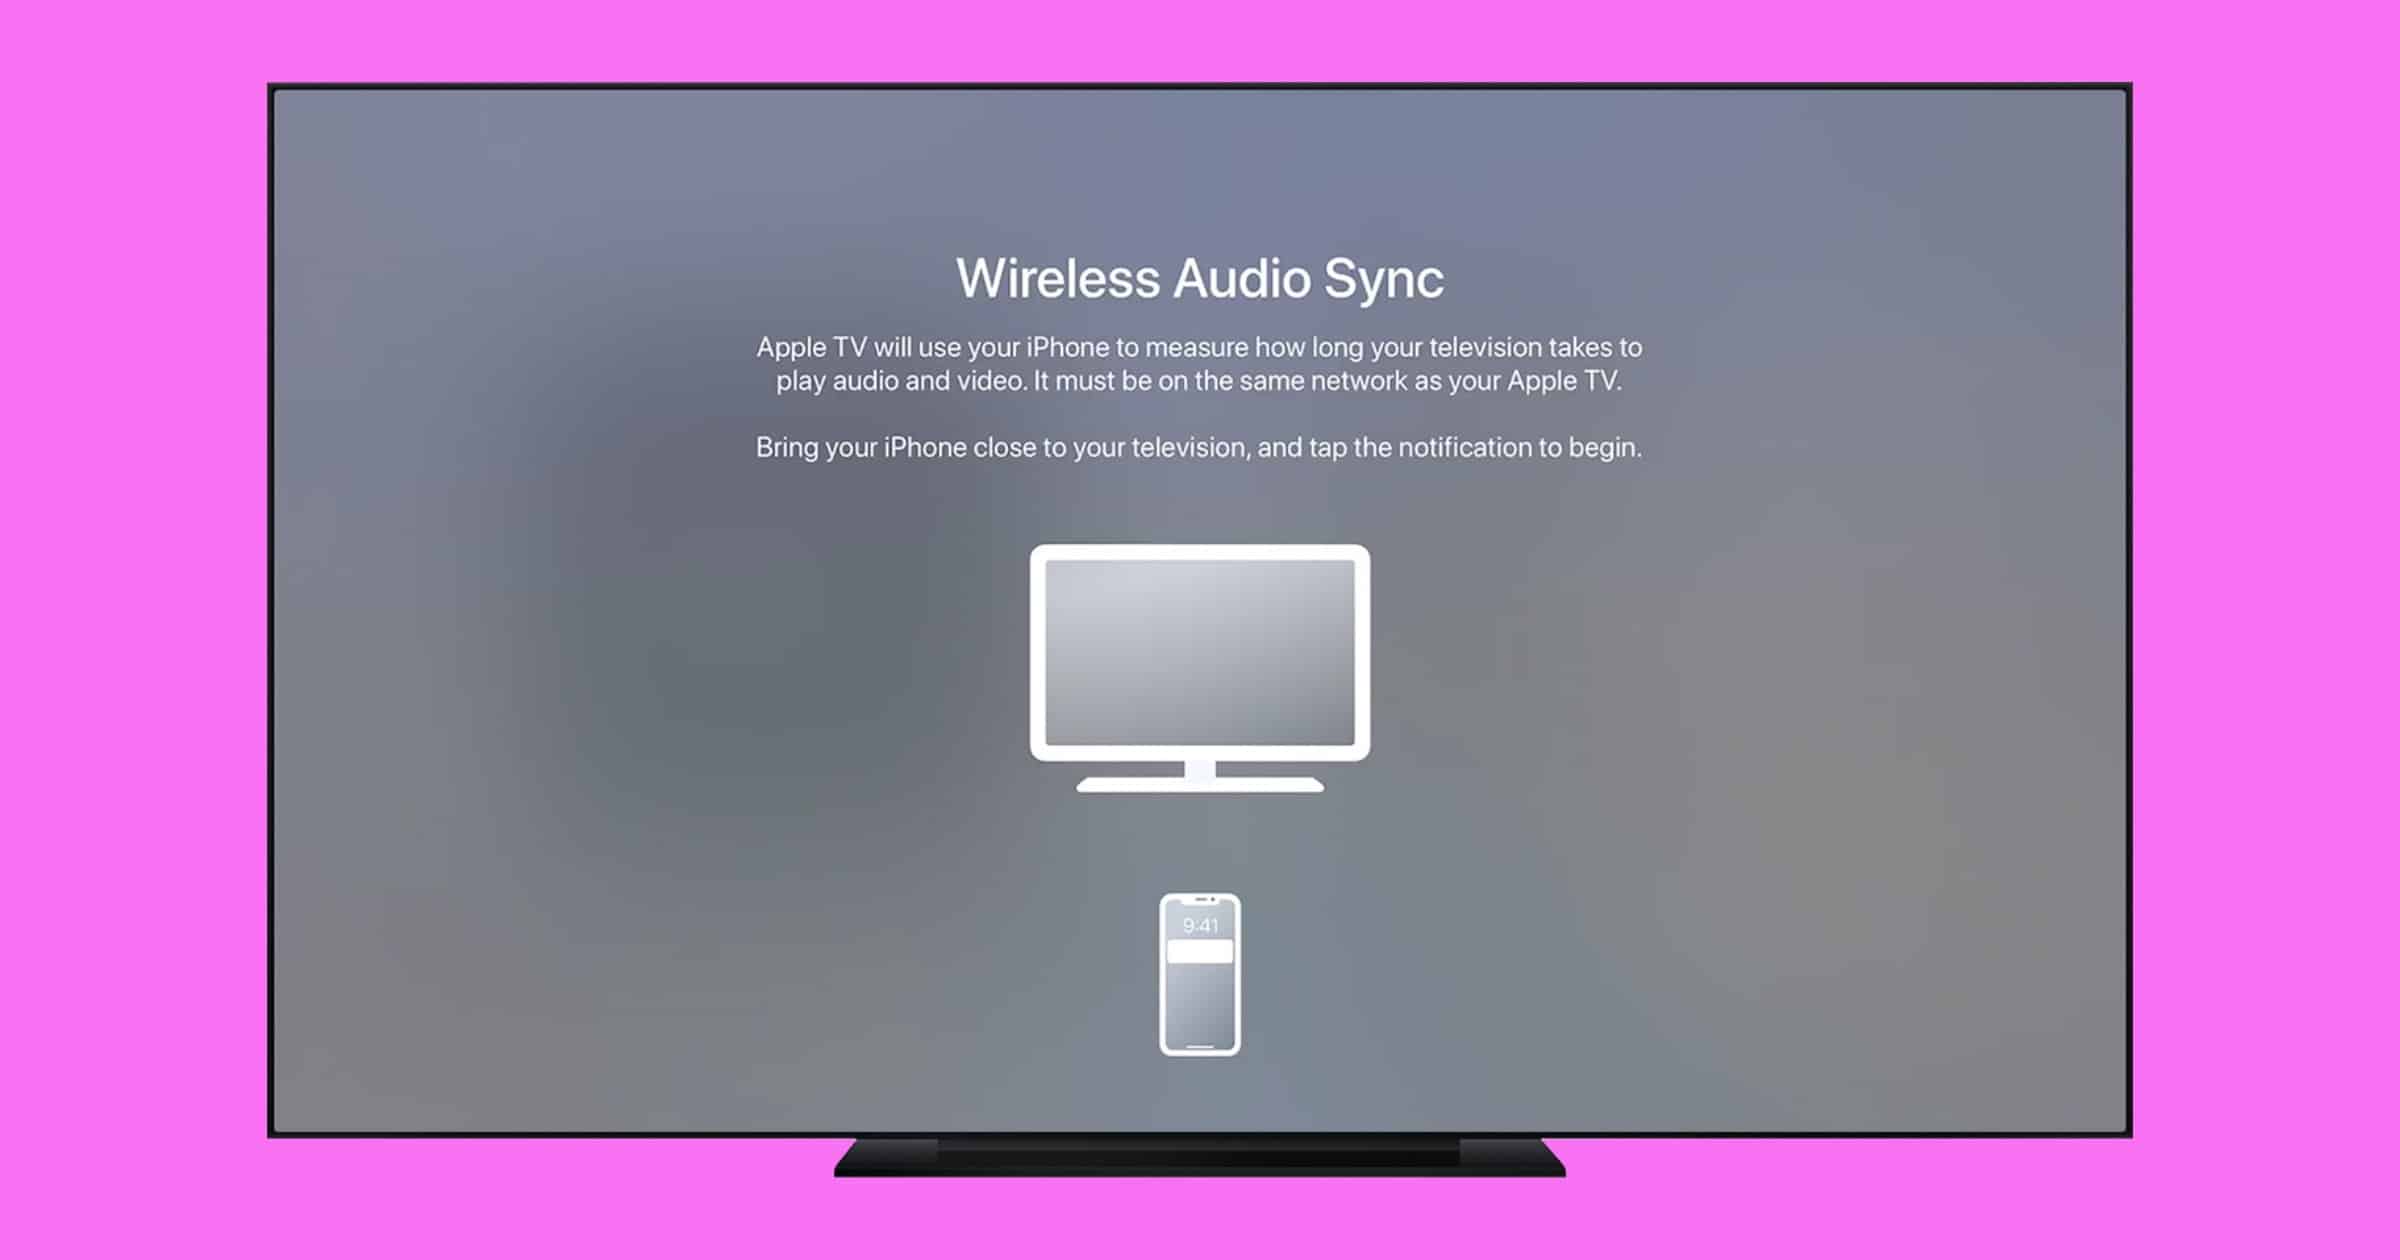 How to Set Up Wireless Audio Sync on Apple TV